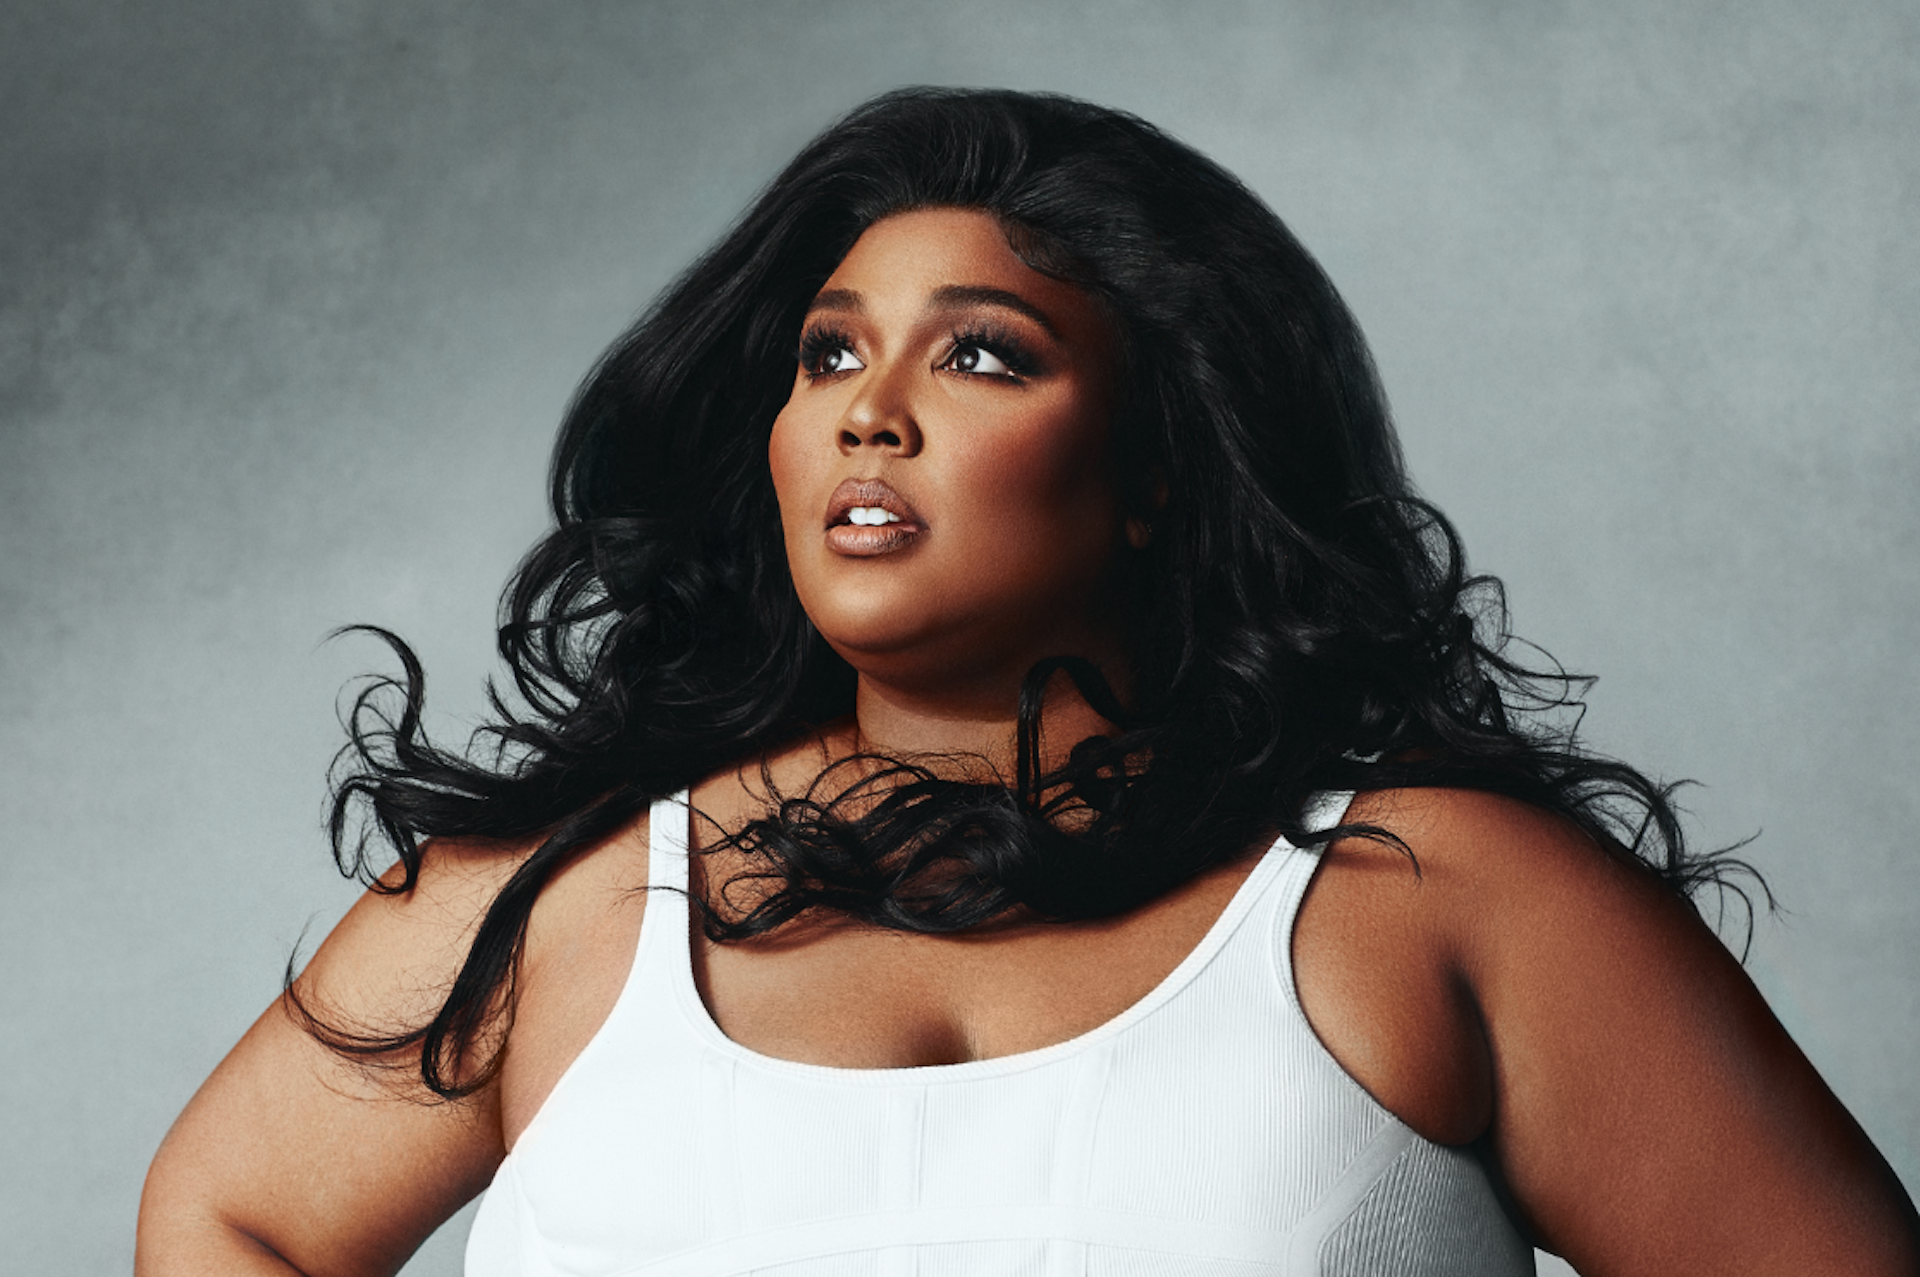 Three former Lizzo dancers have filed lawsuits against the singer and her production company for alleged sexual harassment and a hostile working environment.